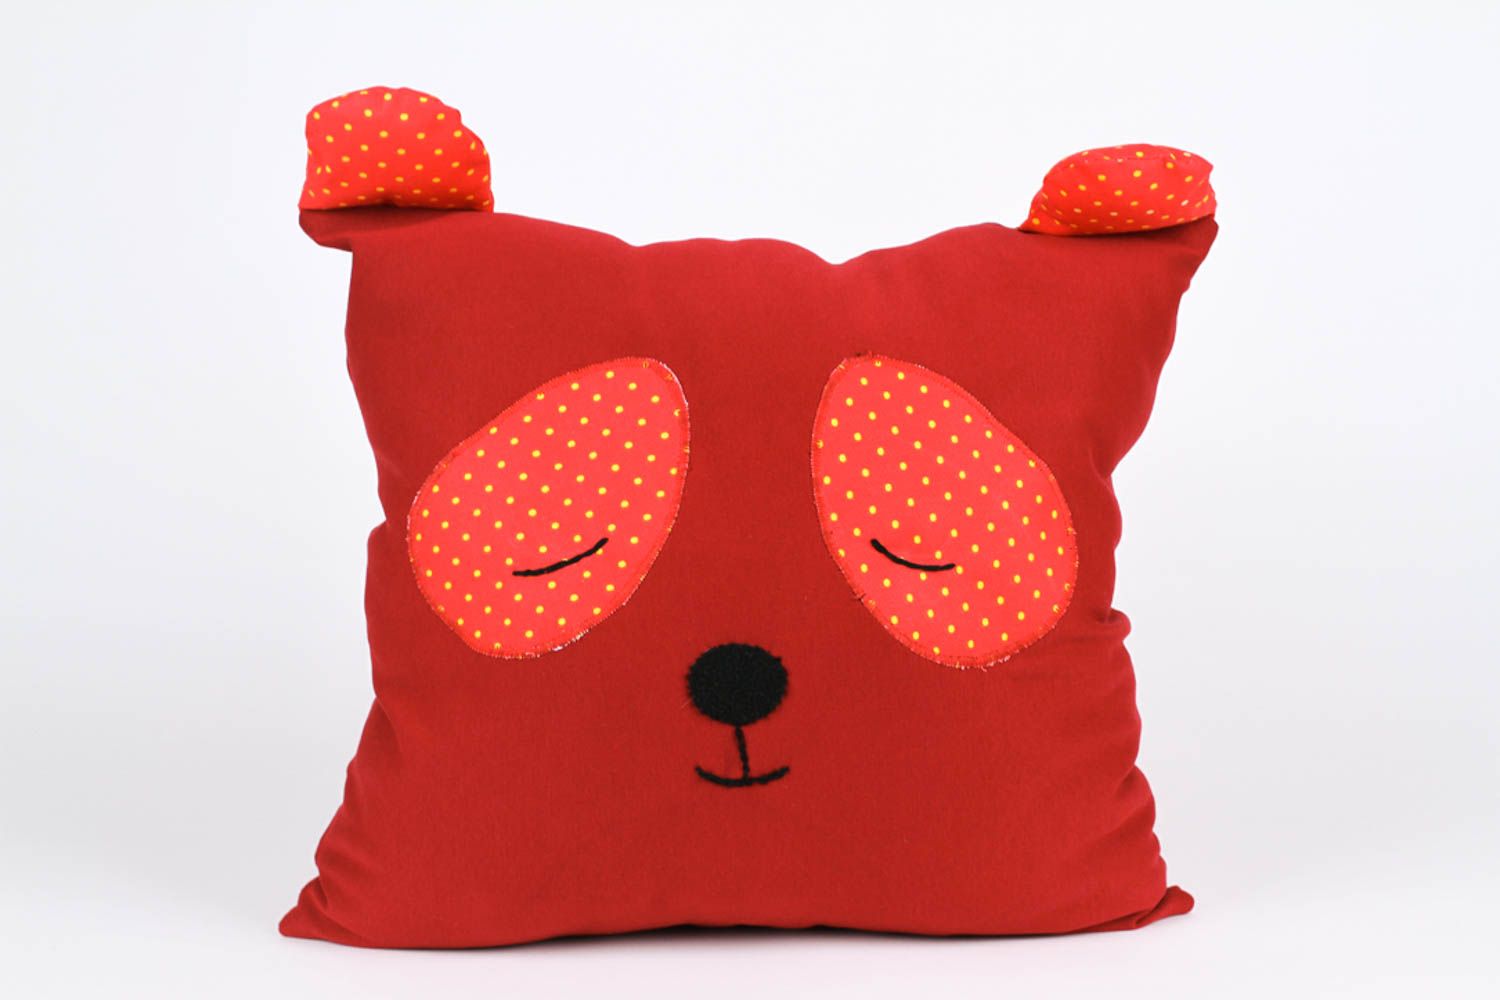 Handmade soft cushion unusual accent pillow stuffed toy best toys for kids photo 2